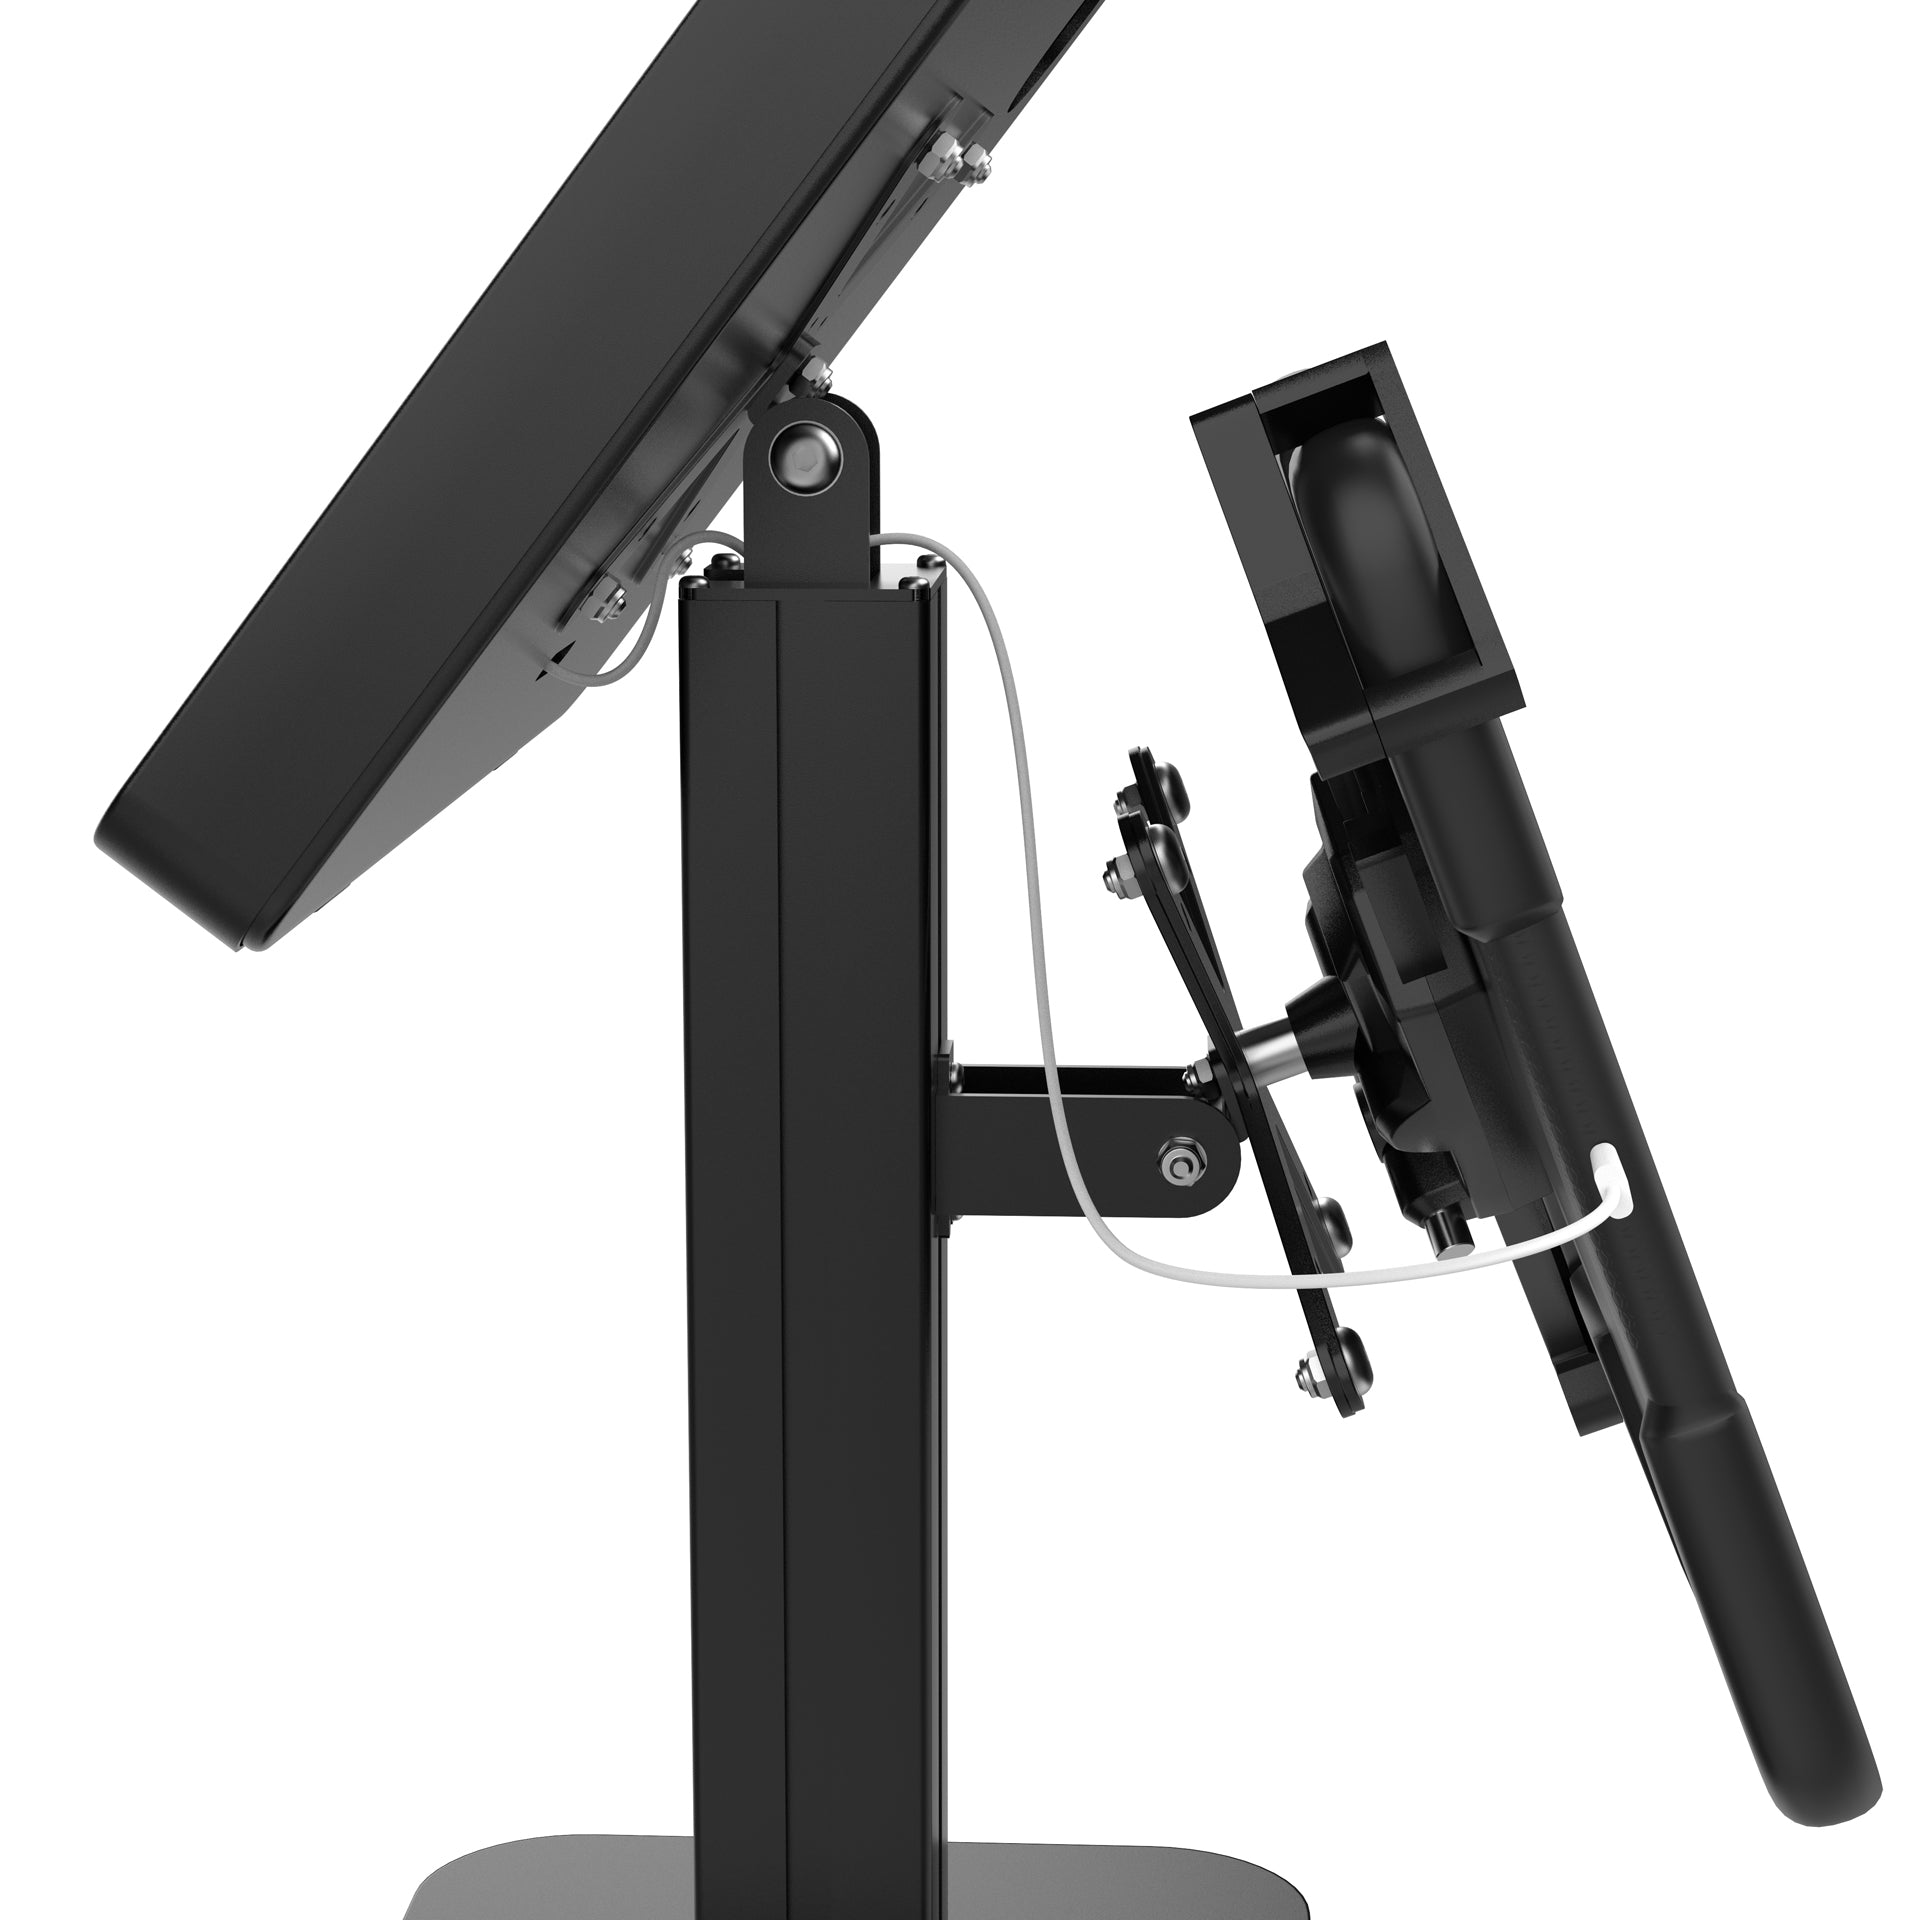 Adjustable Table Mount with Universal Security Holder and Universal Security Enclosure (Black)